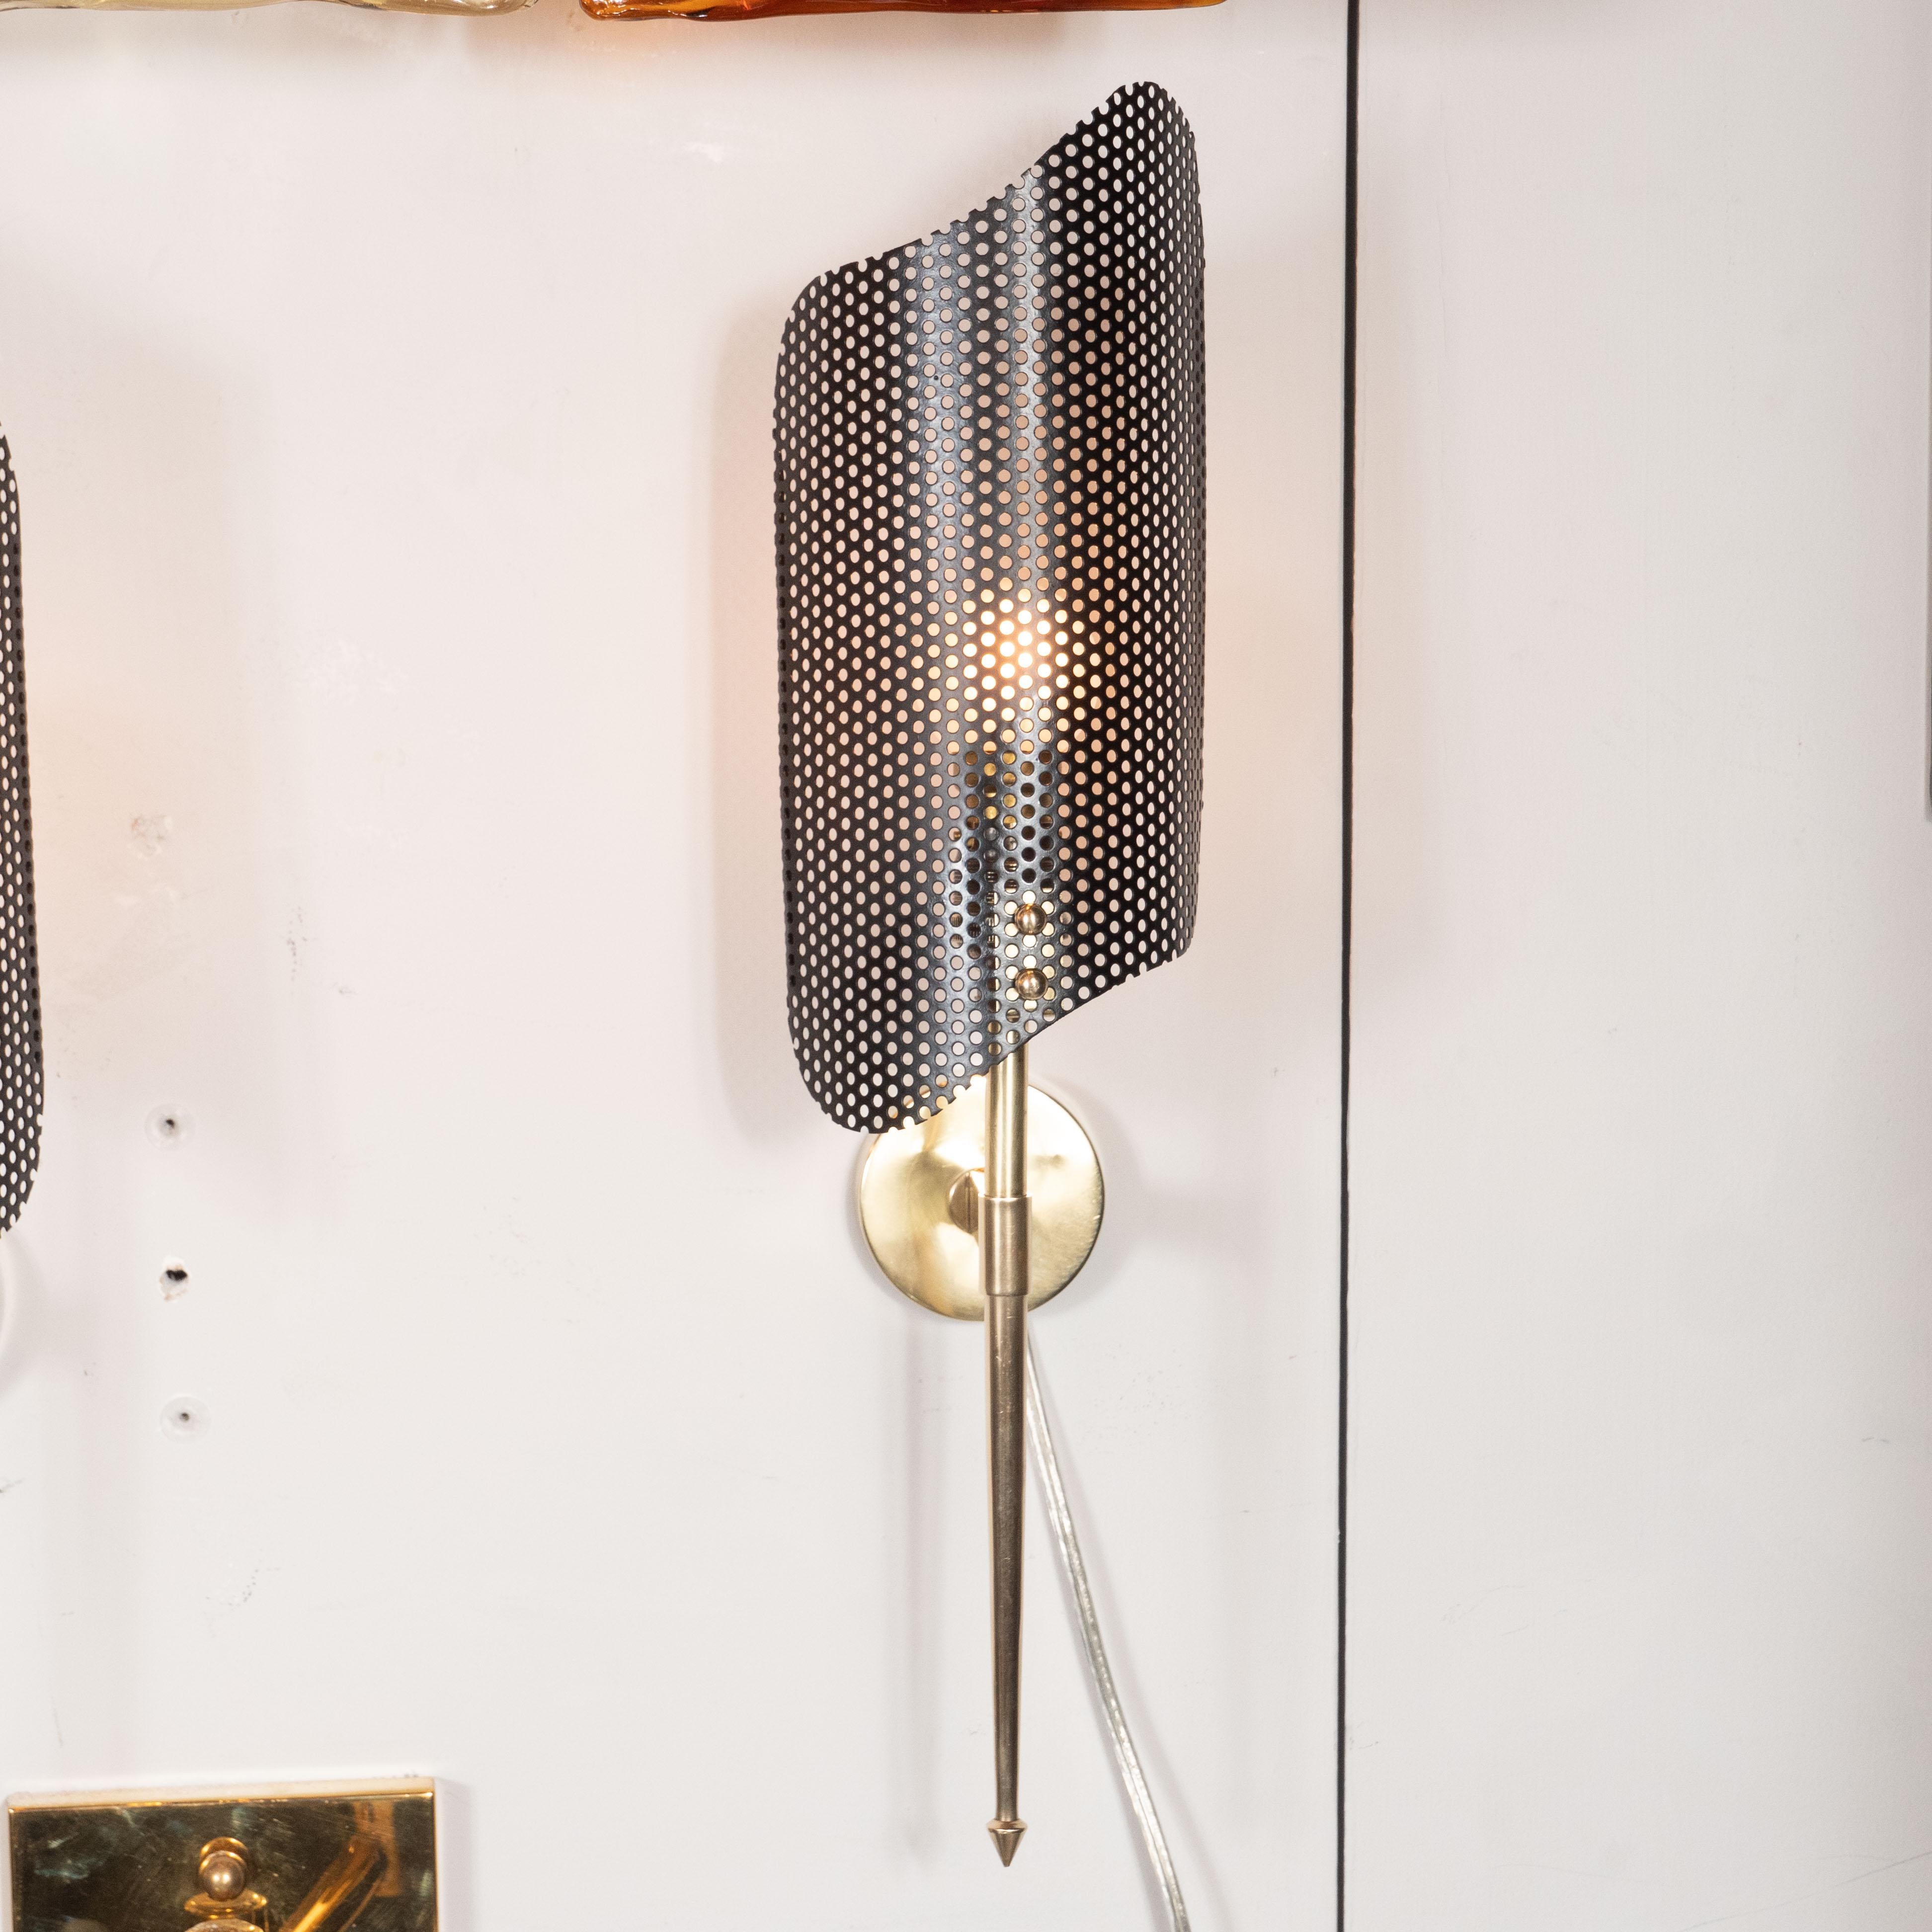 Enameled Mid-Century Modern Brass and Perforated Metal Sconce by Mathieu Mategot